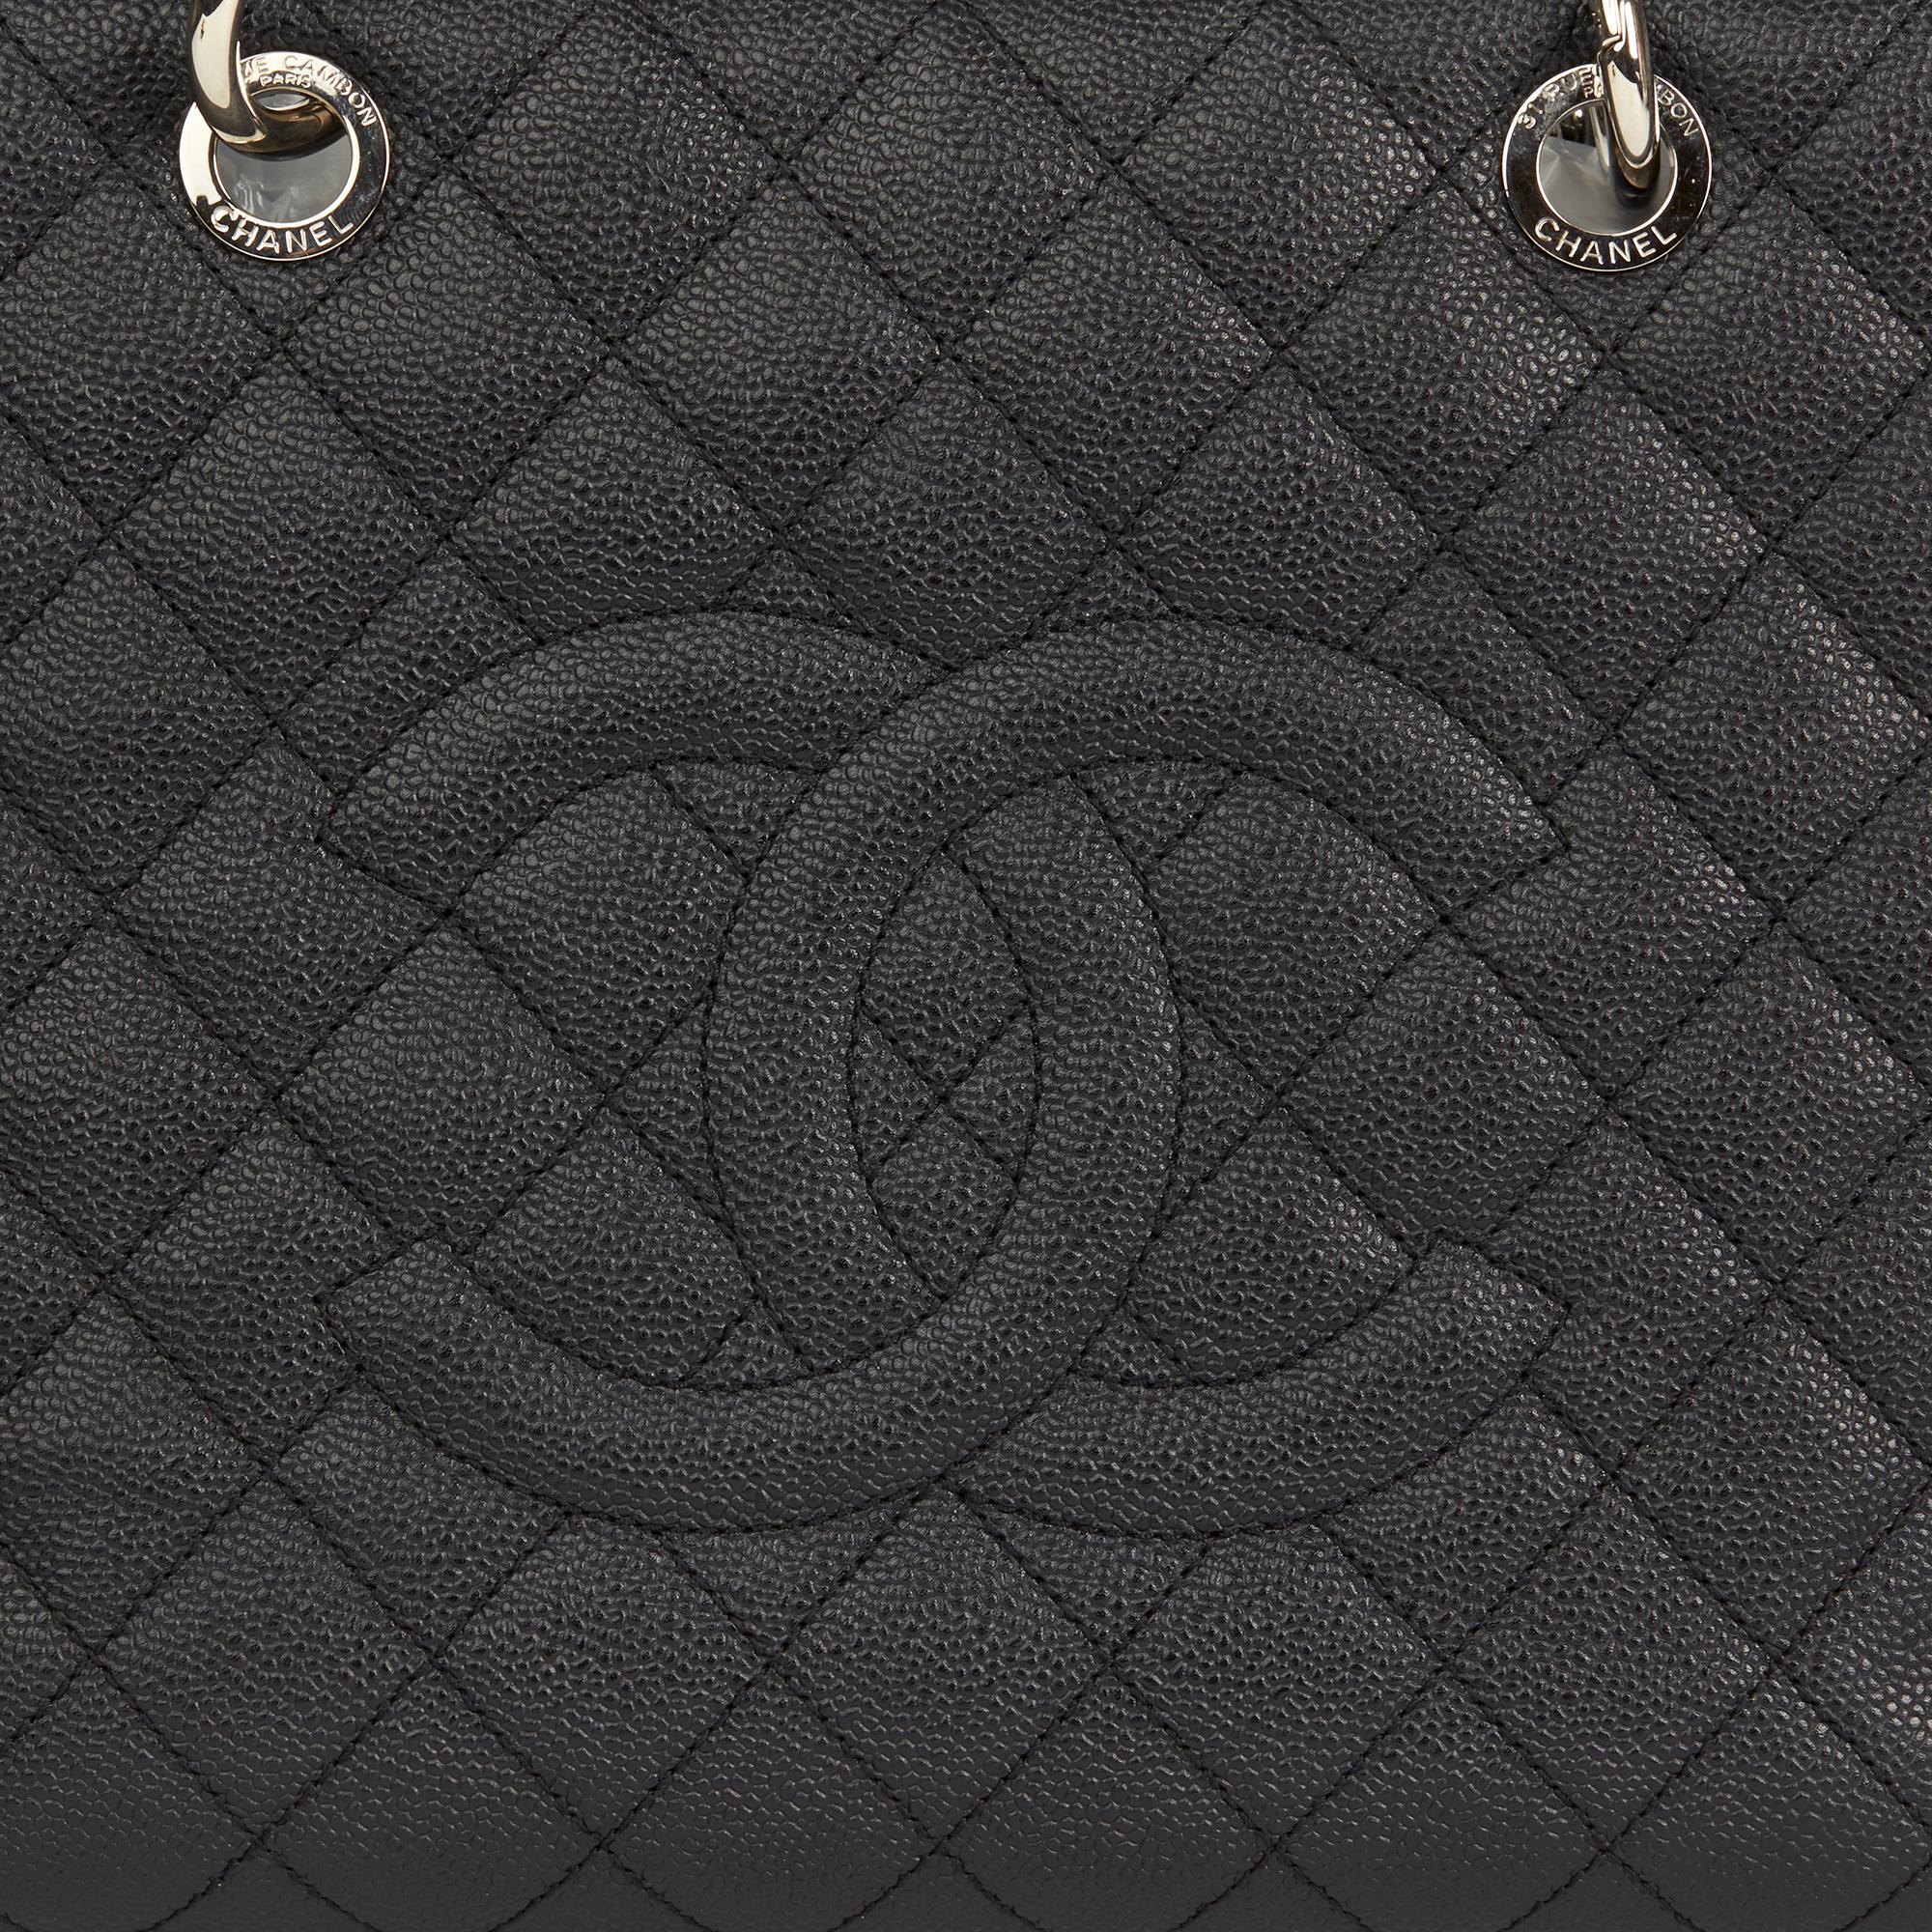 2014 Chanel Black Quilted Caviar Leather Grand Shopping Tote GST 2